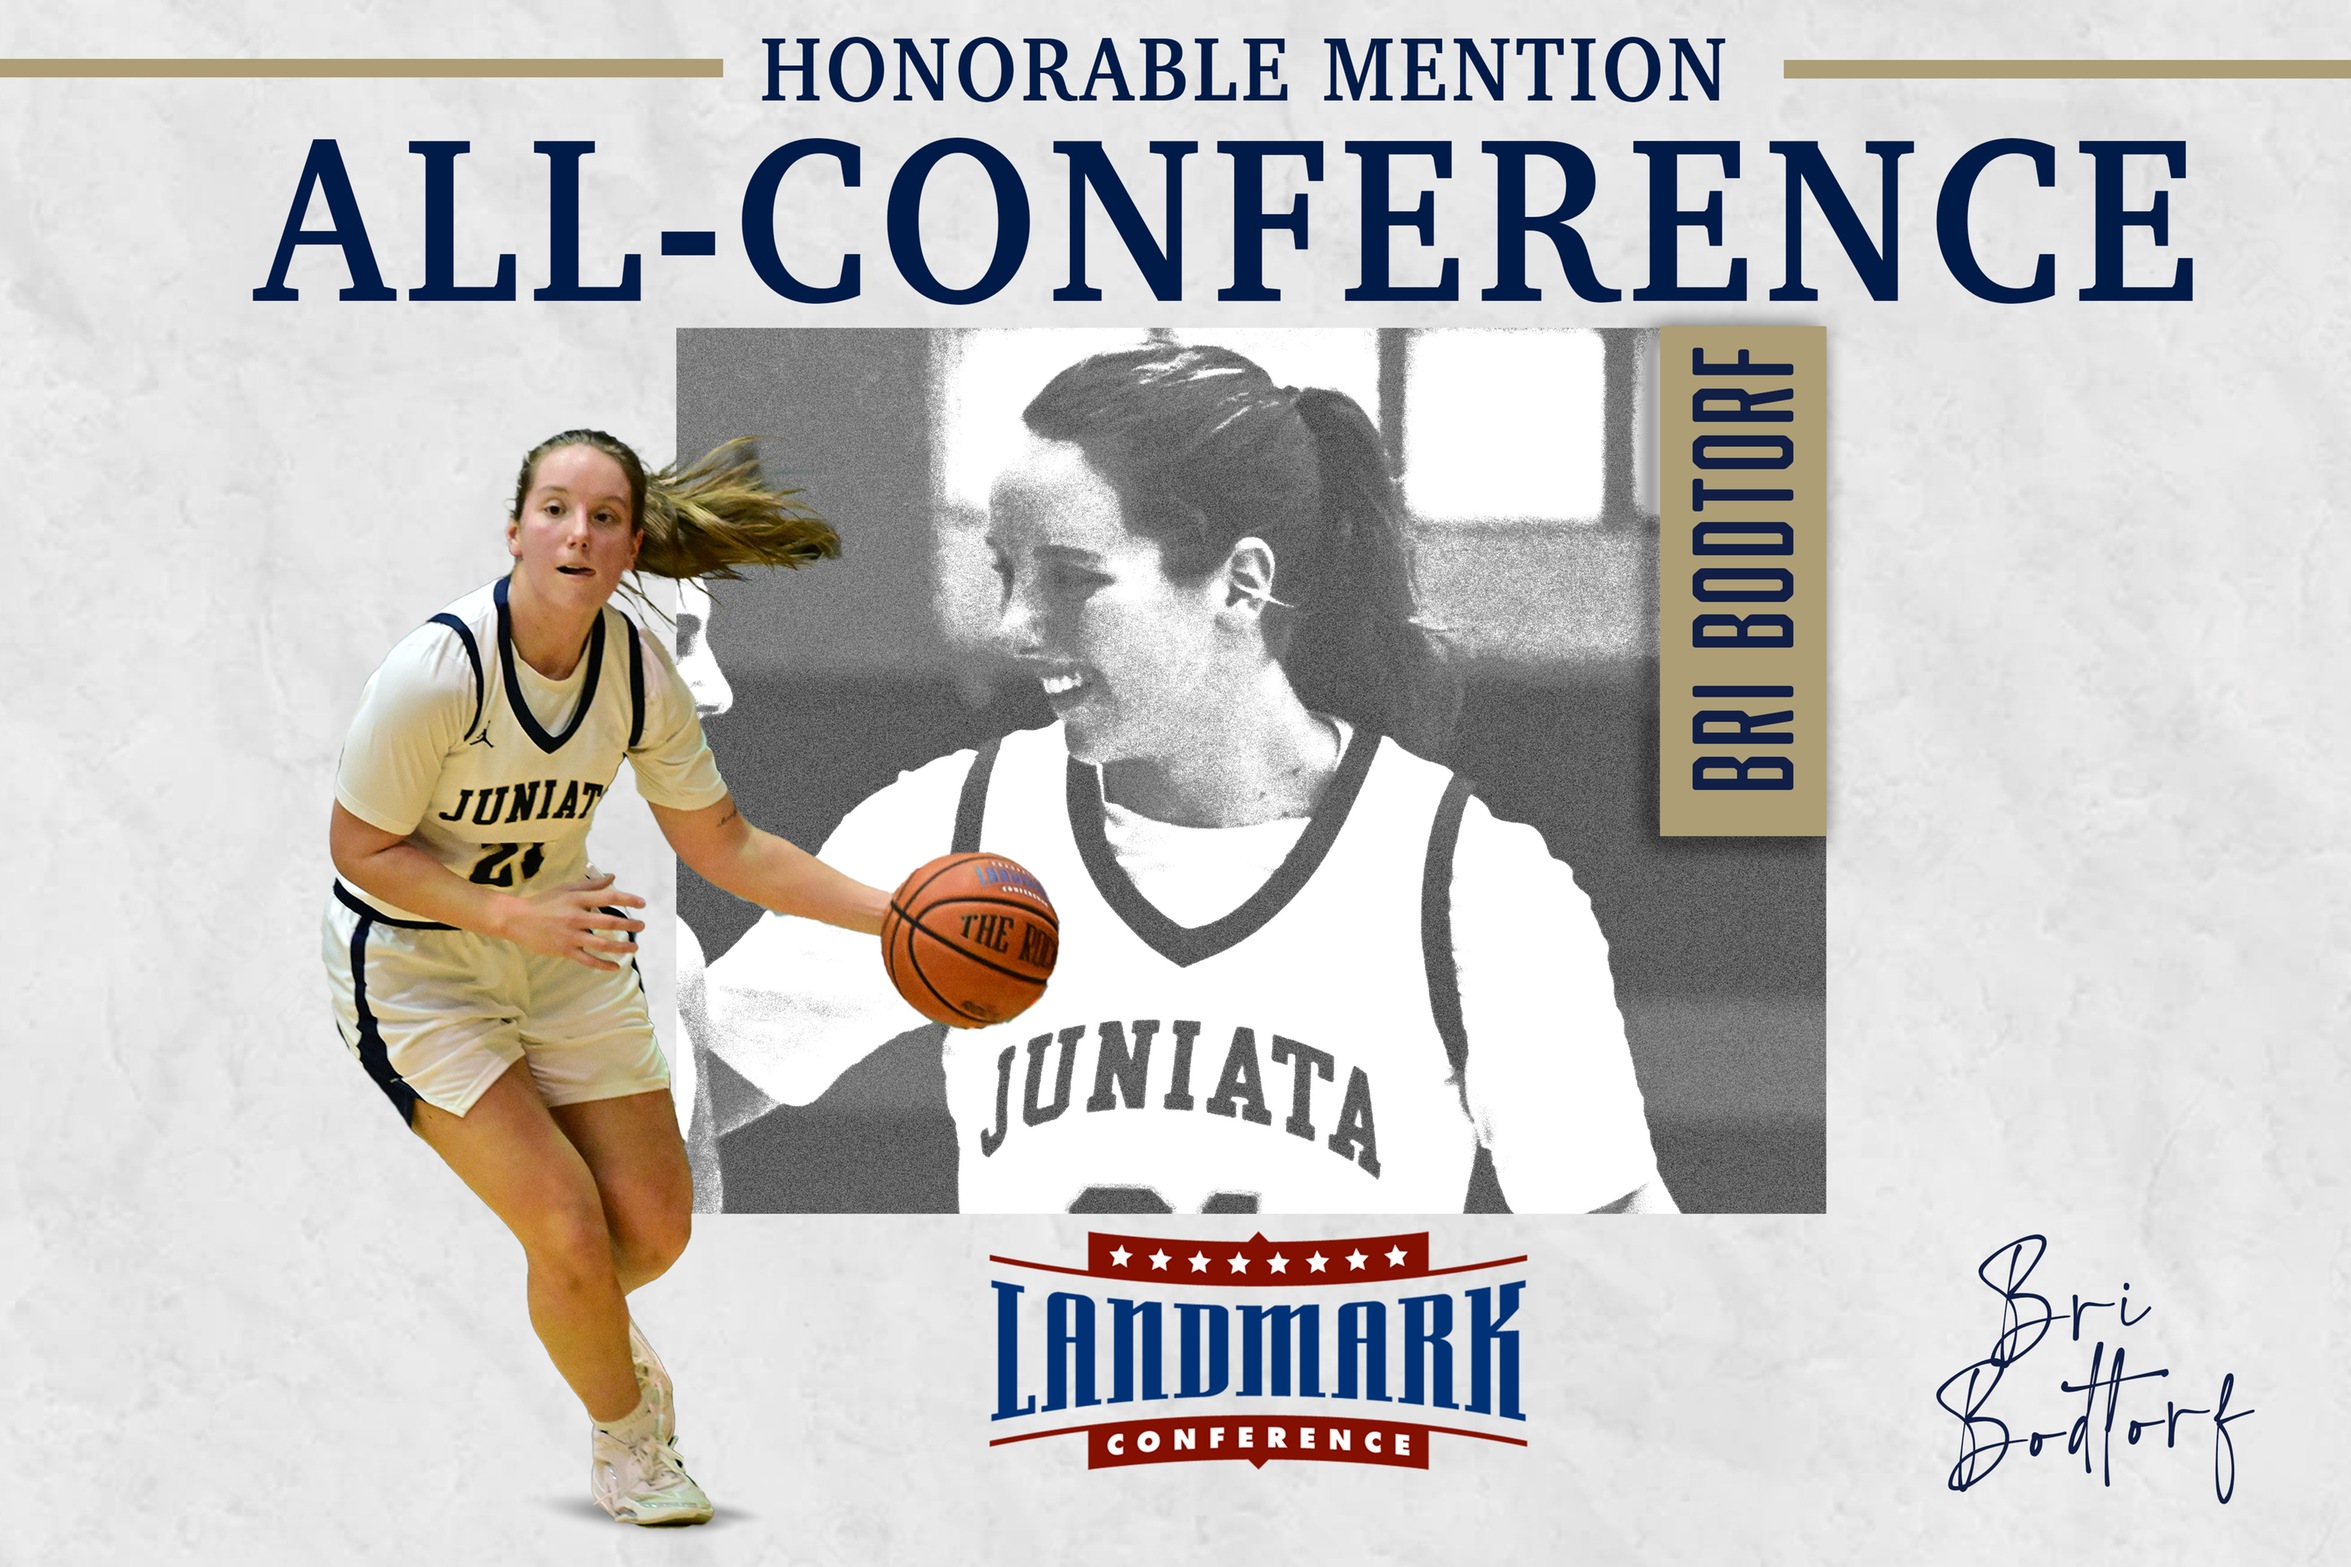 Bodtorf Earns Landmark All-Conference Honorable Mention Recognition